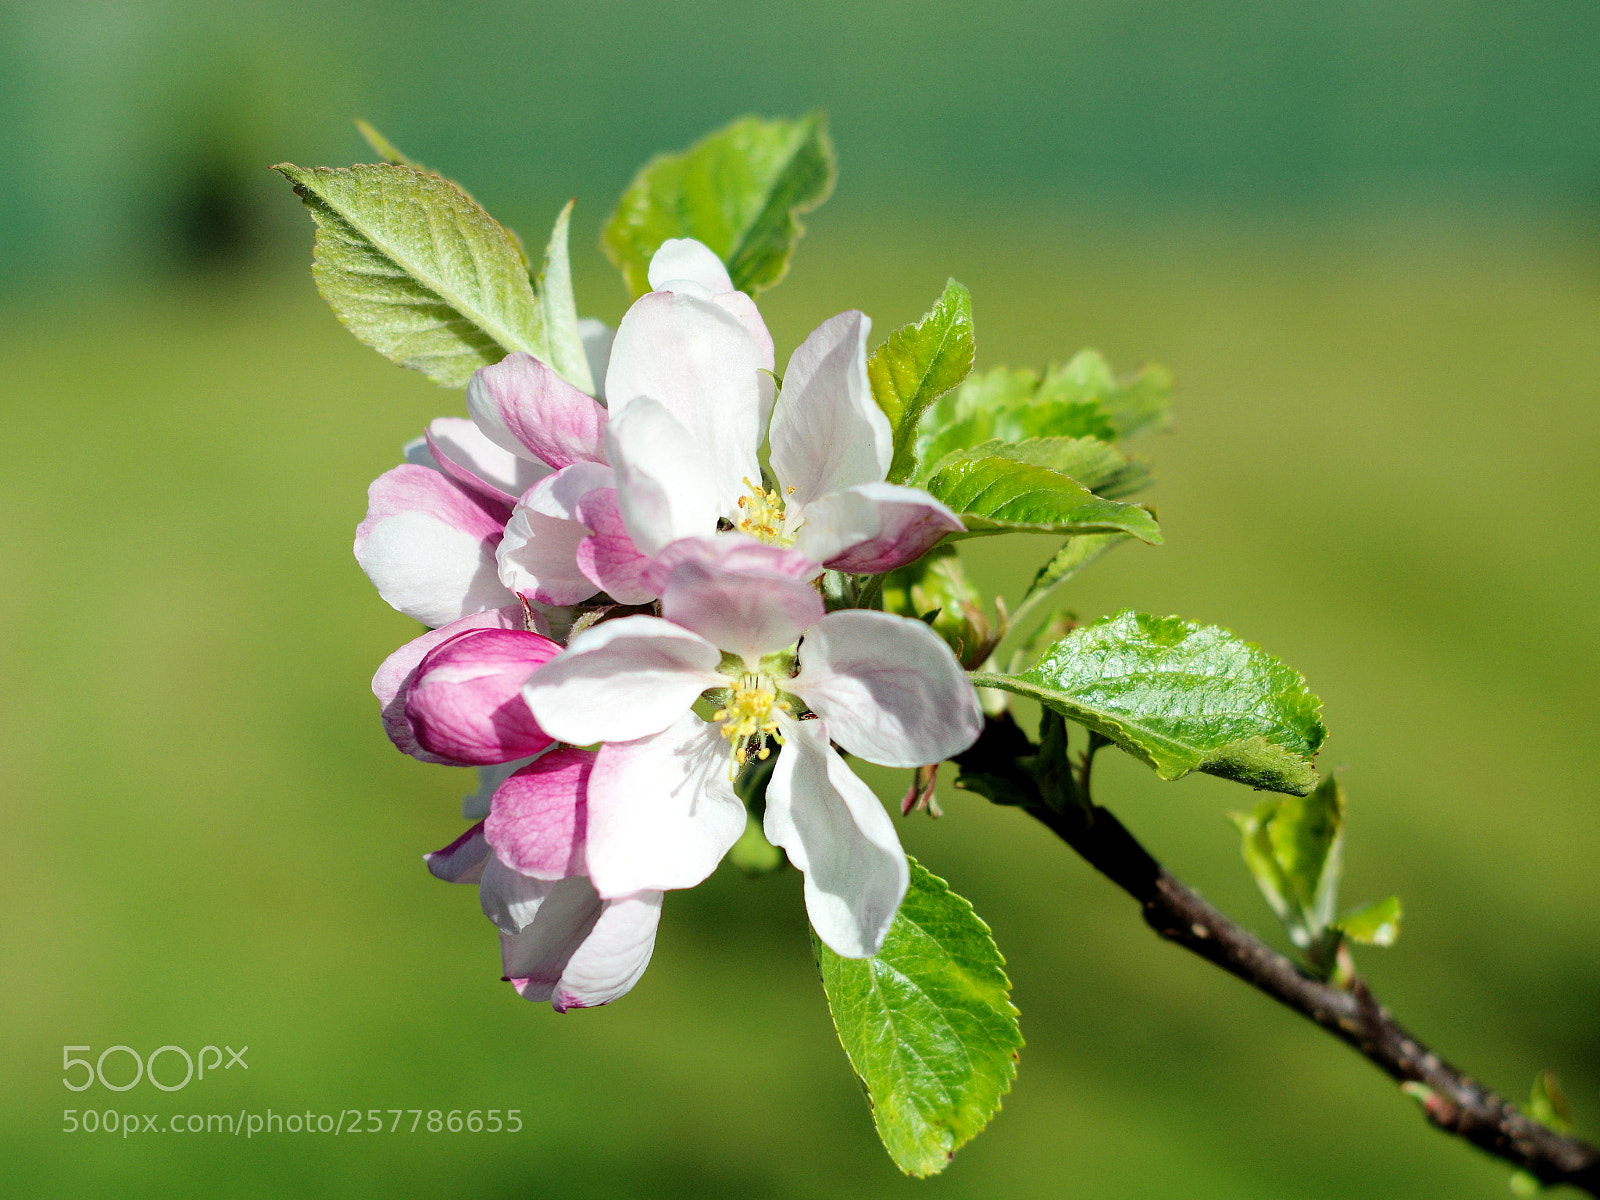 Pentax K-3 sample photo. Apple blossom today photography